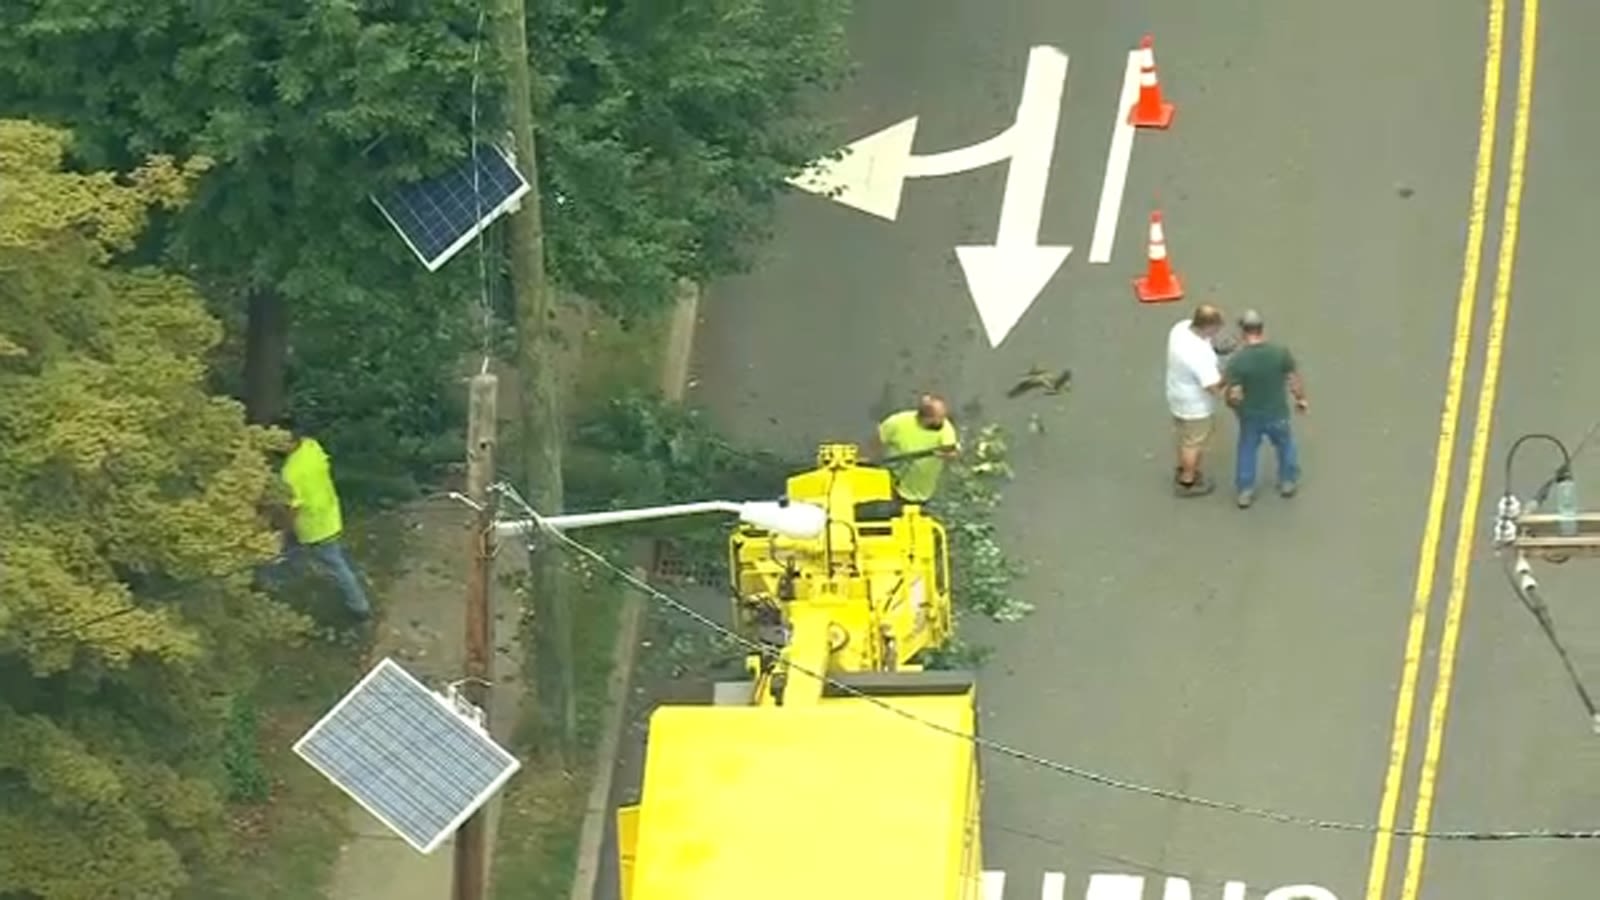 3 workers stung by bees while trimming trees in Paramus